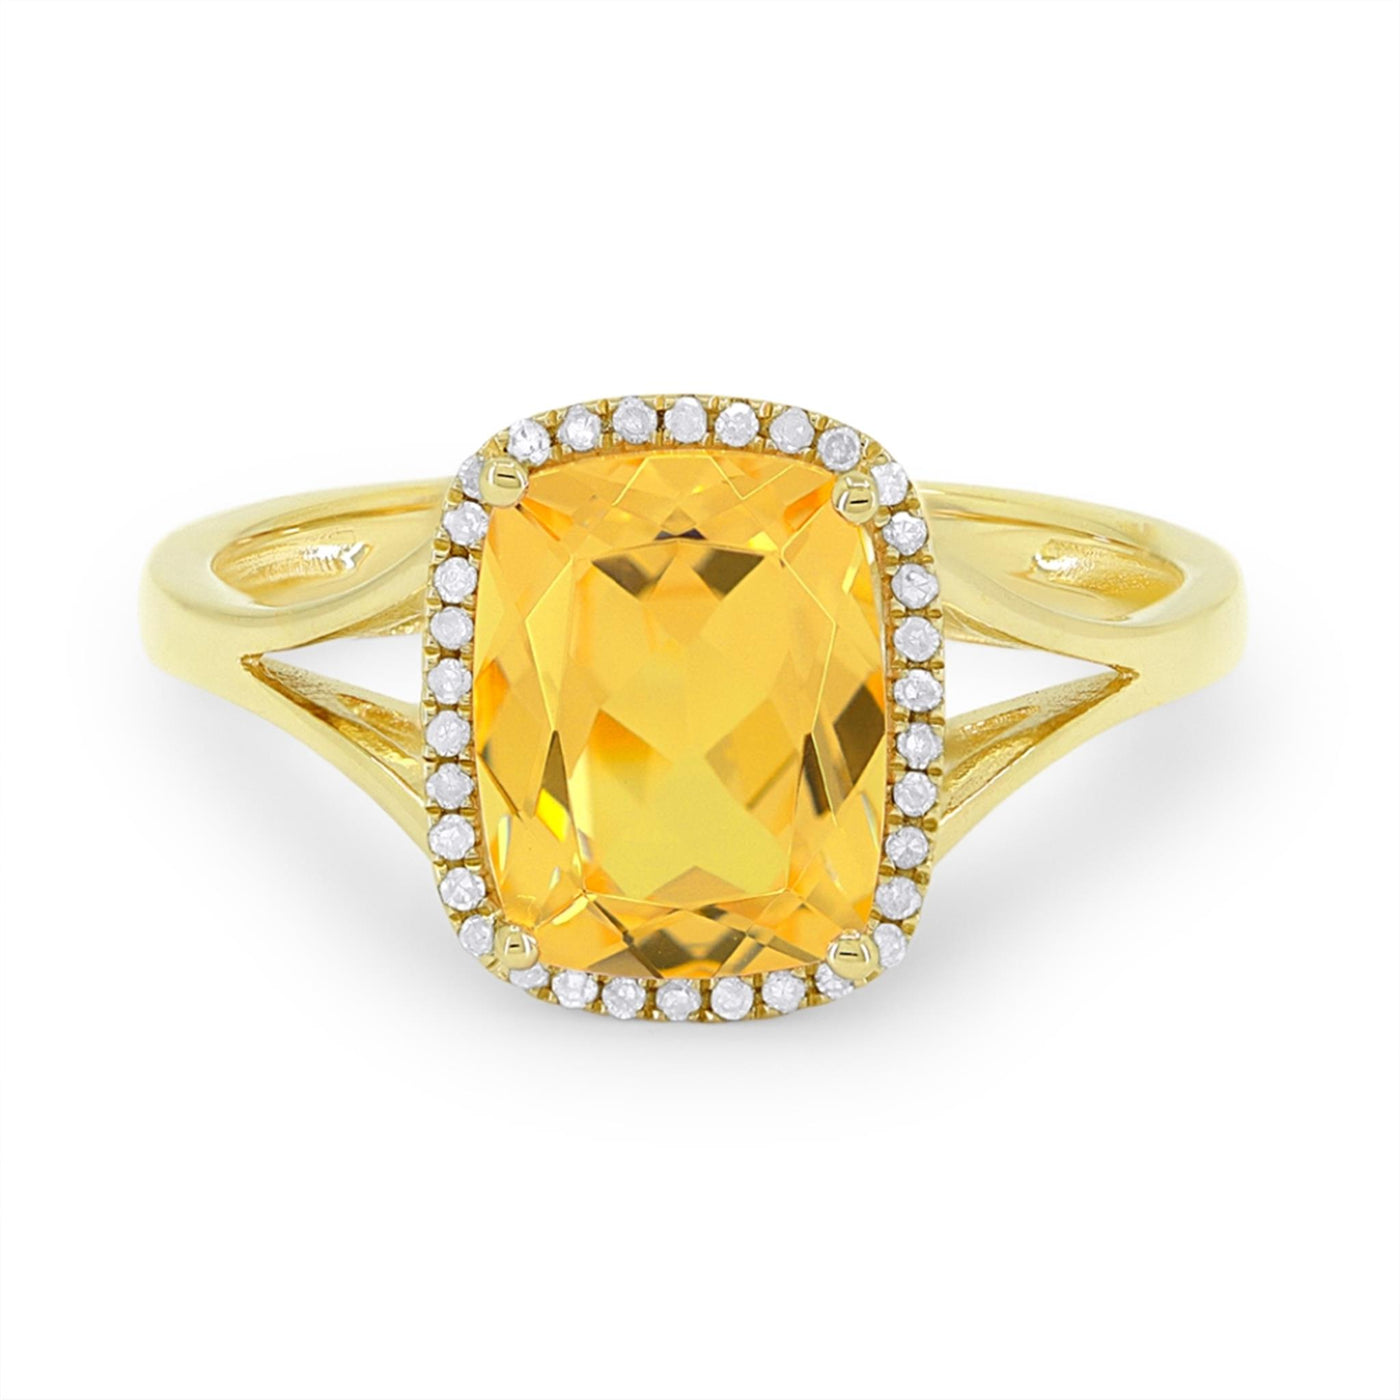 Madison L 14K White Gold 2.09ctw Halo Style Citrine and Diamonds Ring